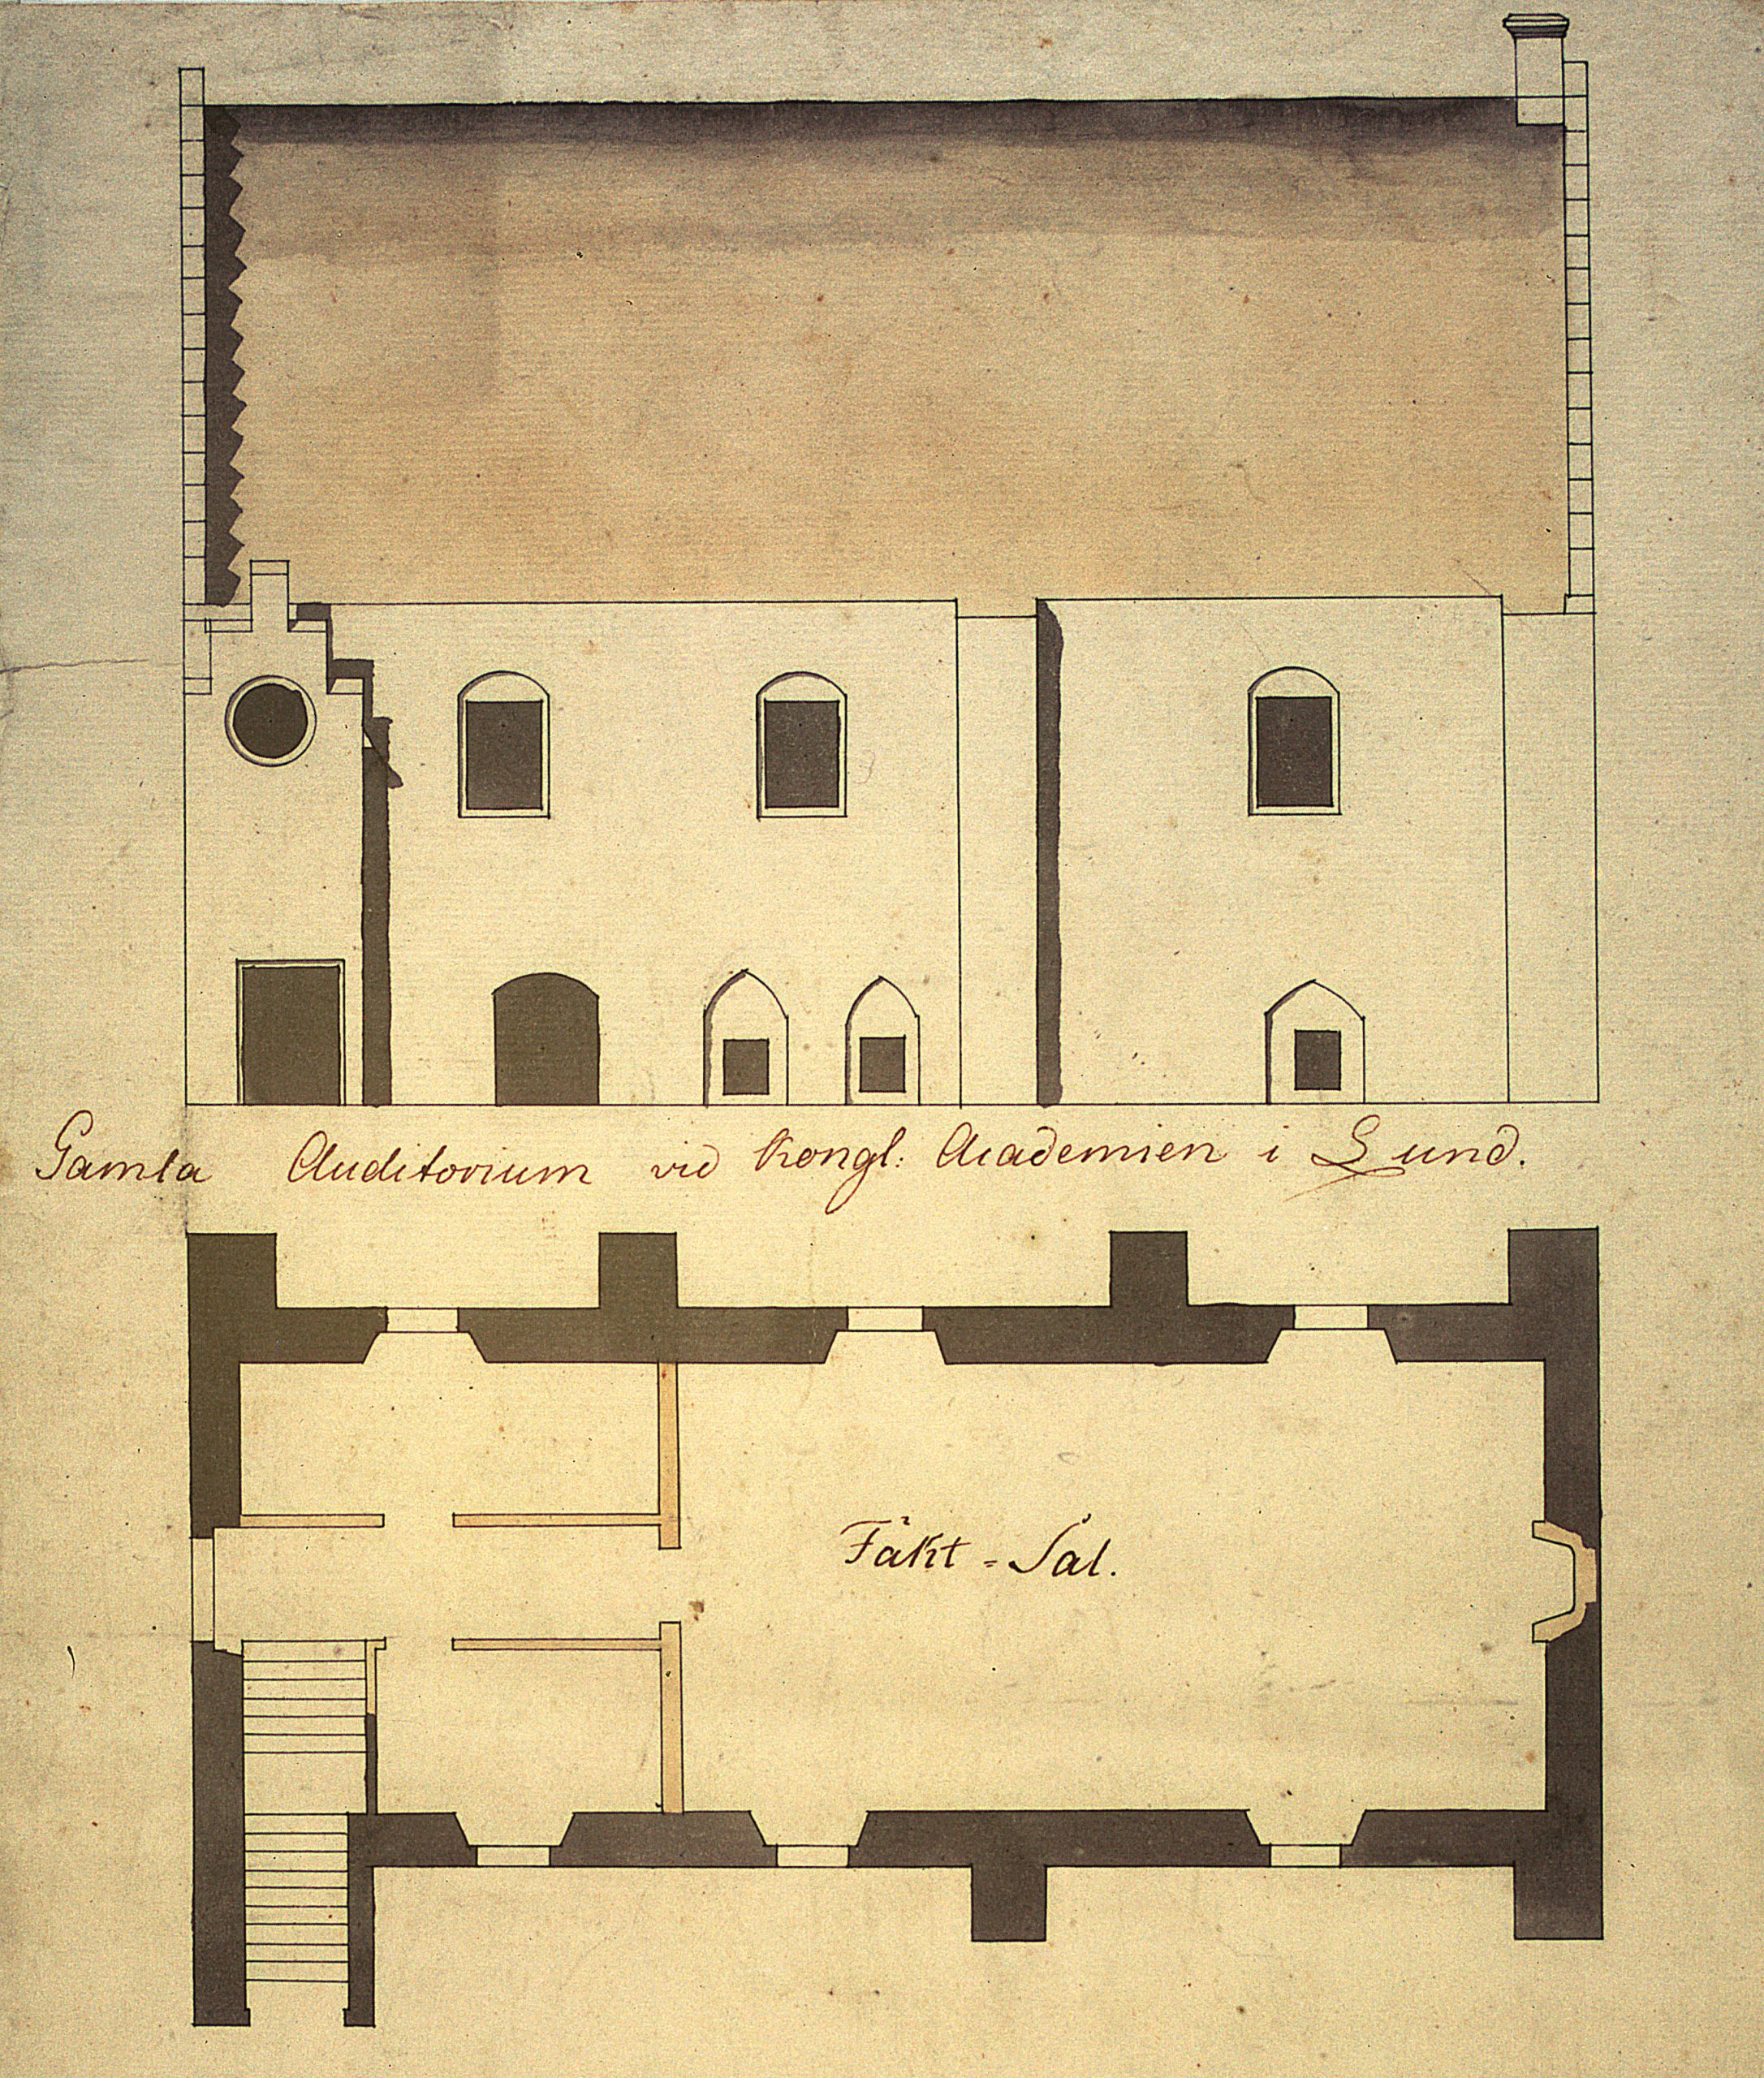 Part of a floor plan of Liberiet from the time the University took over the building